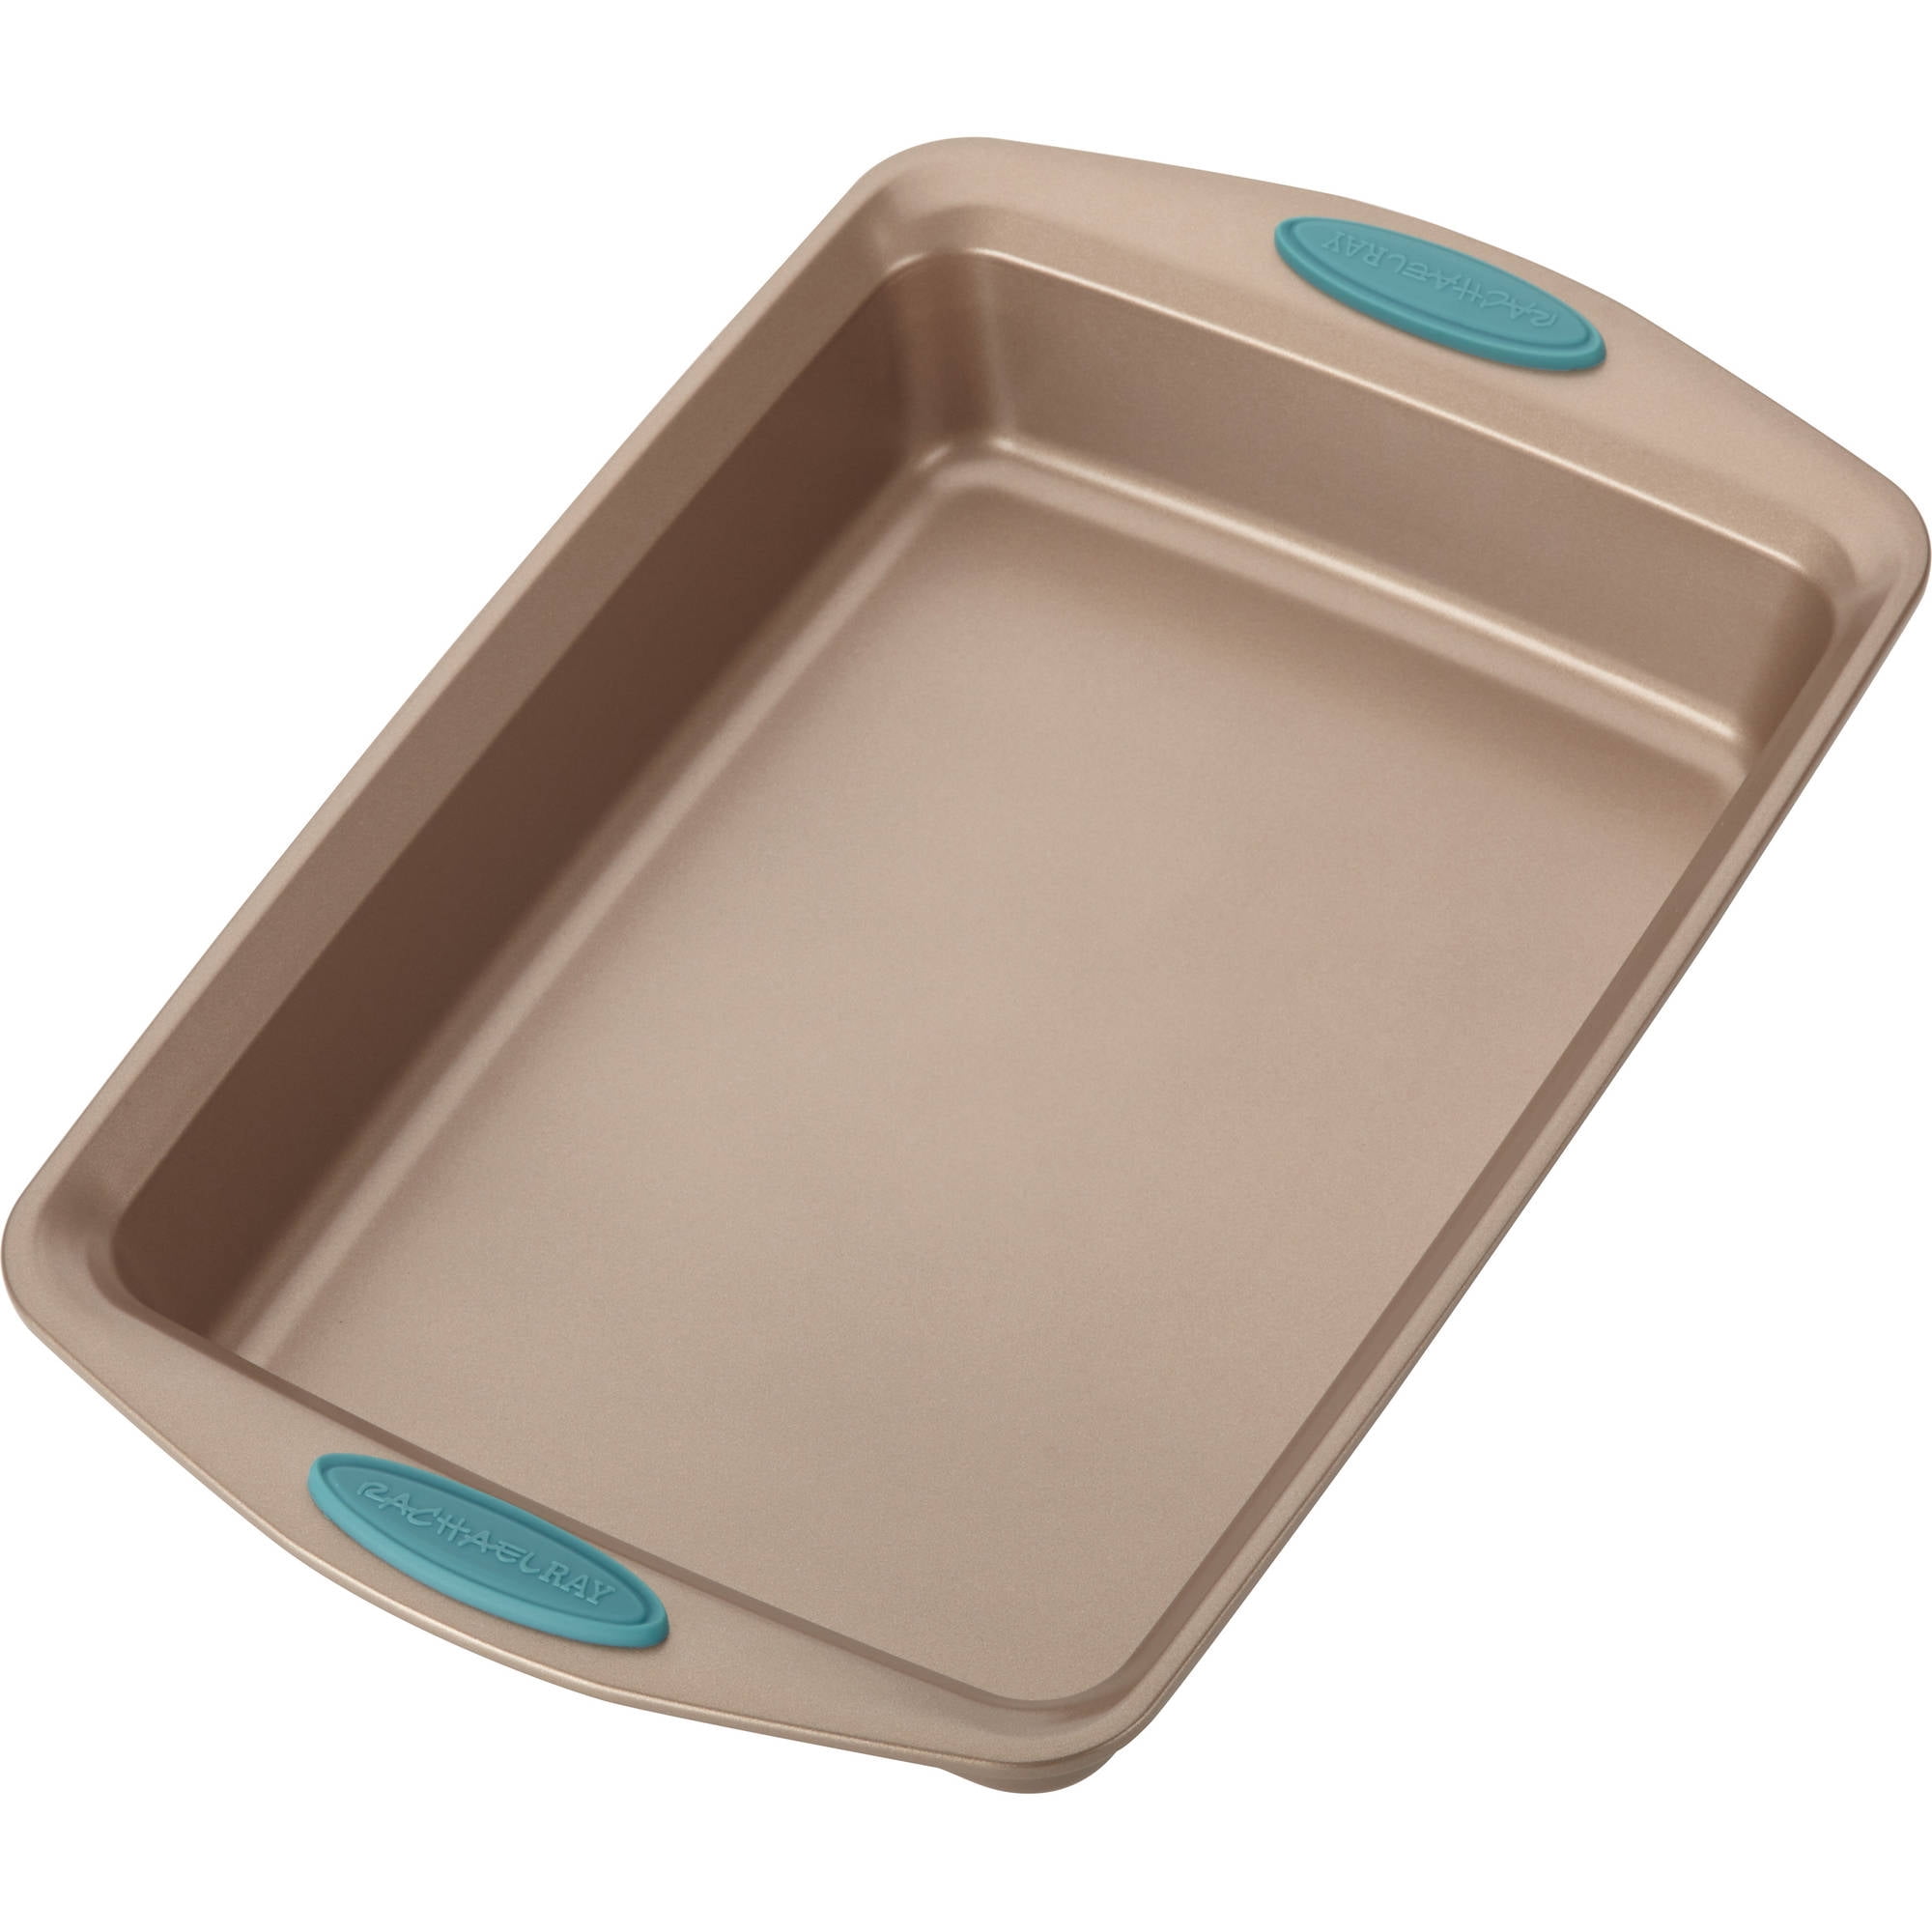  Rachael Ray Cucina Bakeware Set Includes Nonstick Bread Baking  Cookie Sheet and Cake Pans, 5 Piece, Latte Brown with Agave Blue Grips :  Everything Else